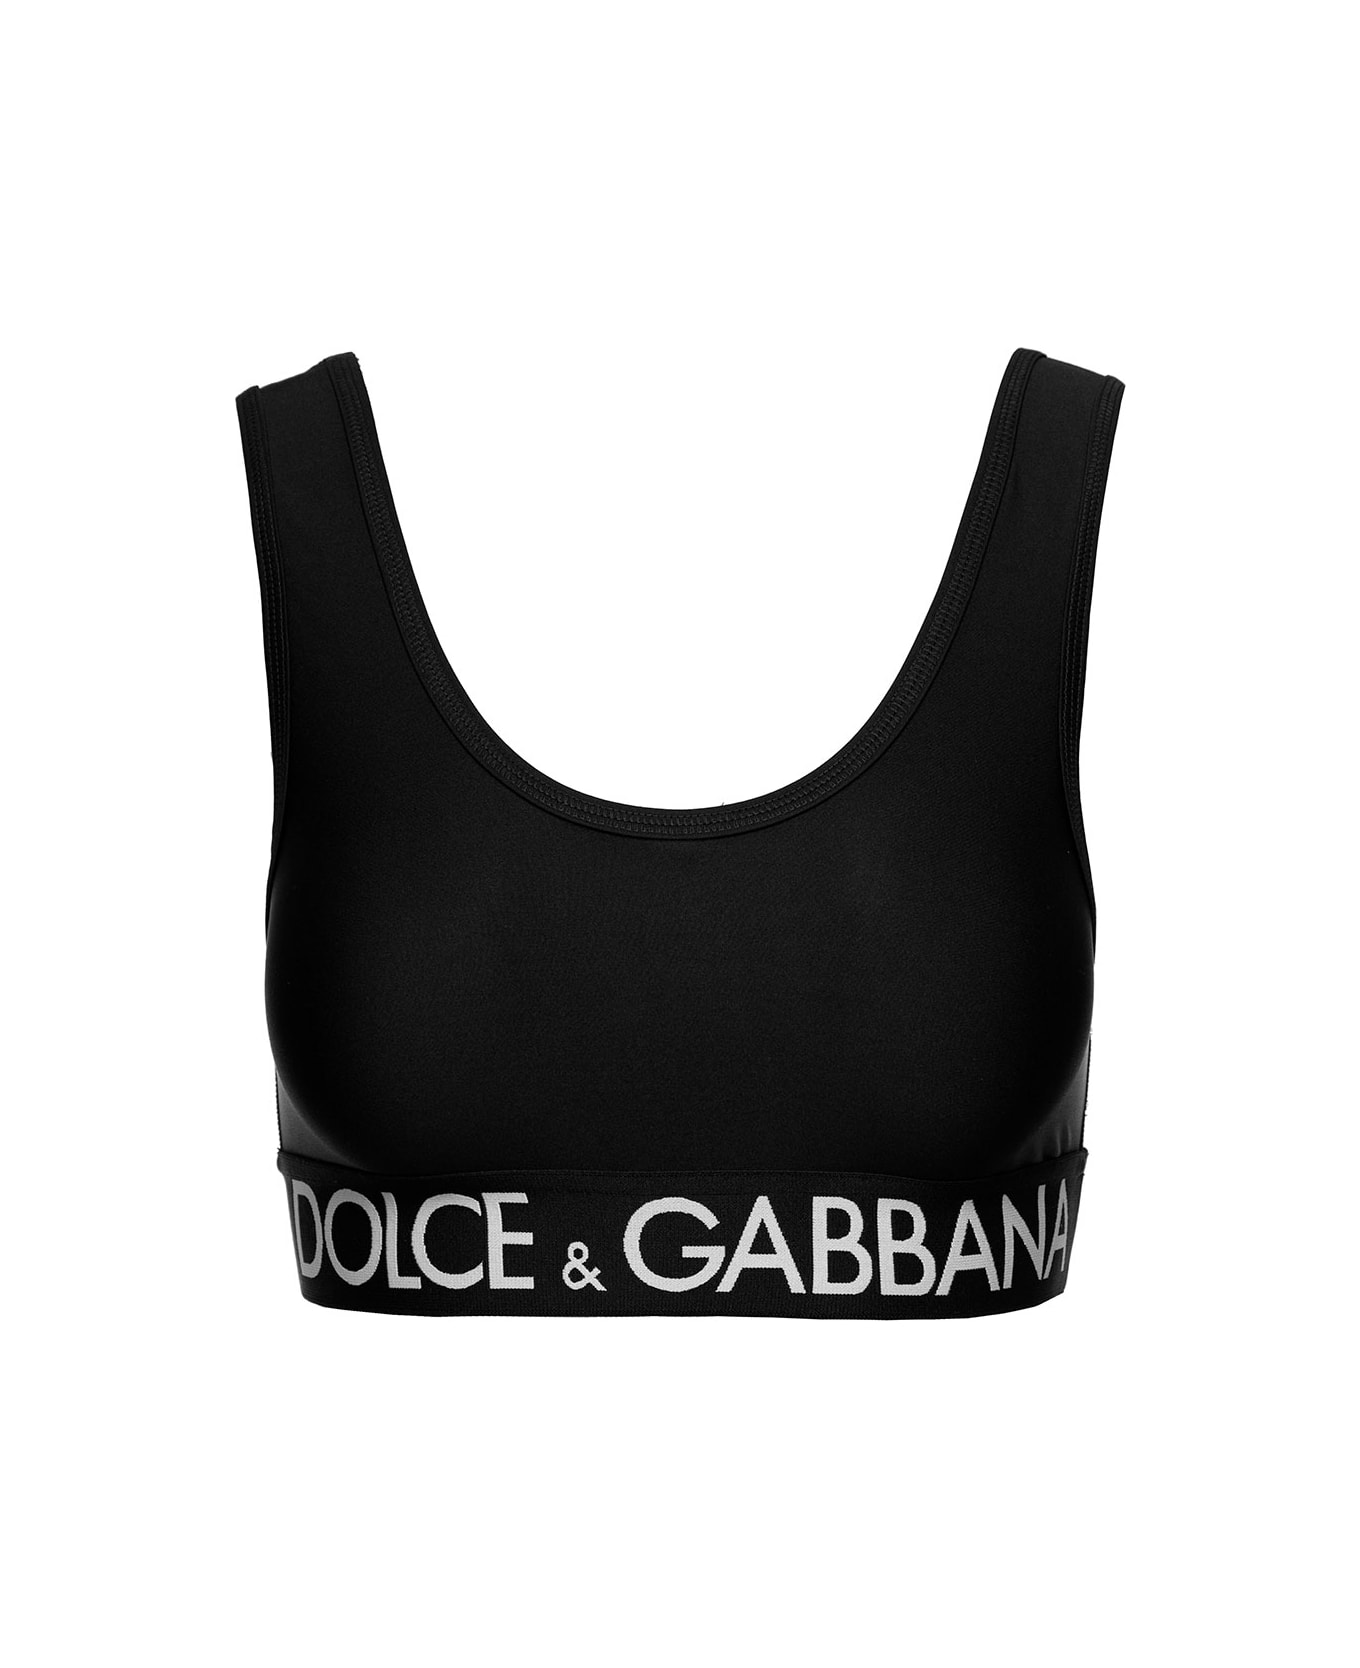 Dolce & Gabbana Black Sports Bra With Branded Band In Stretch Tech Fabric Woman - Black